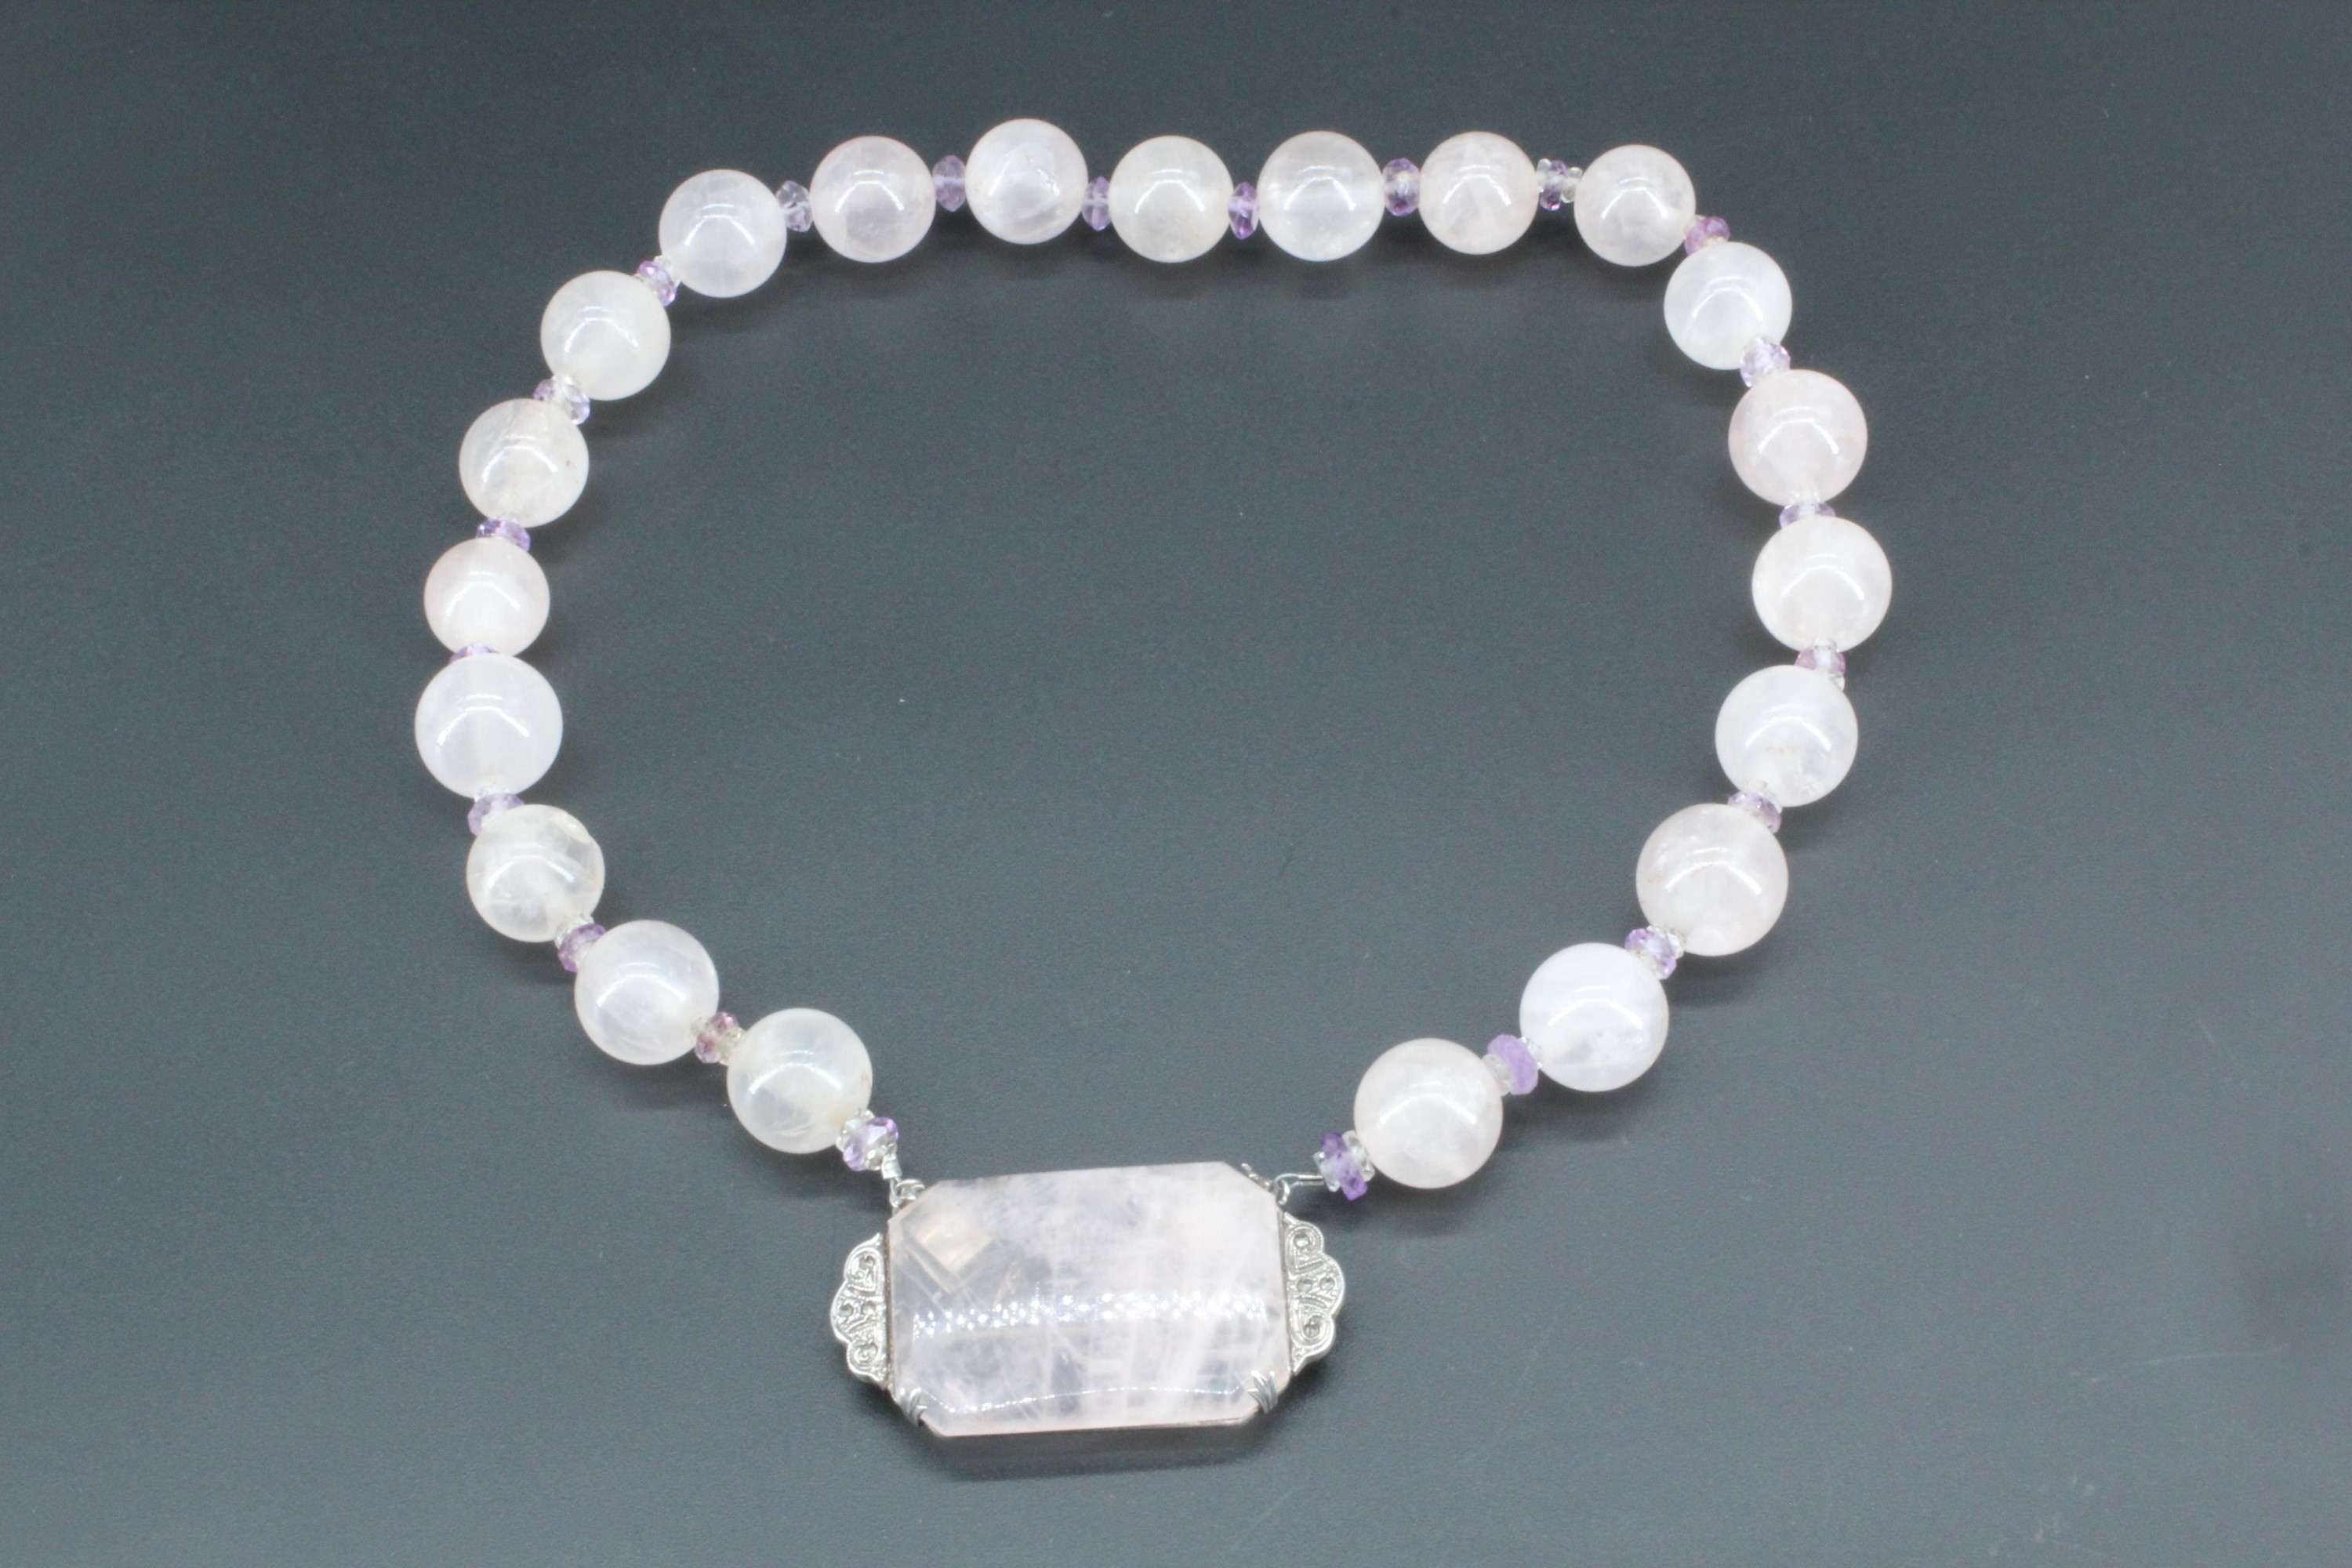 A vintage Art Deco rose quartz and amethyst necklace, of rose quartz spherical beads divided by